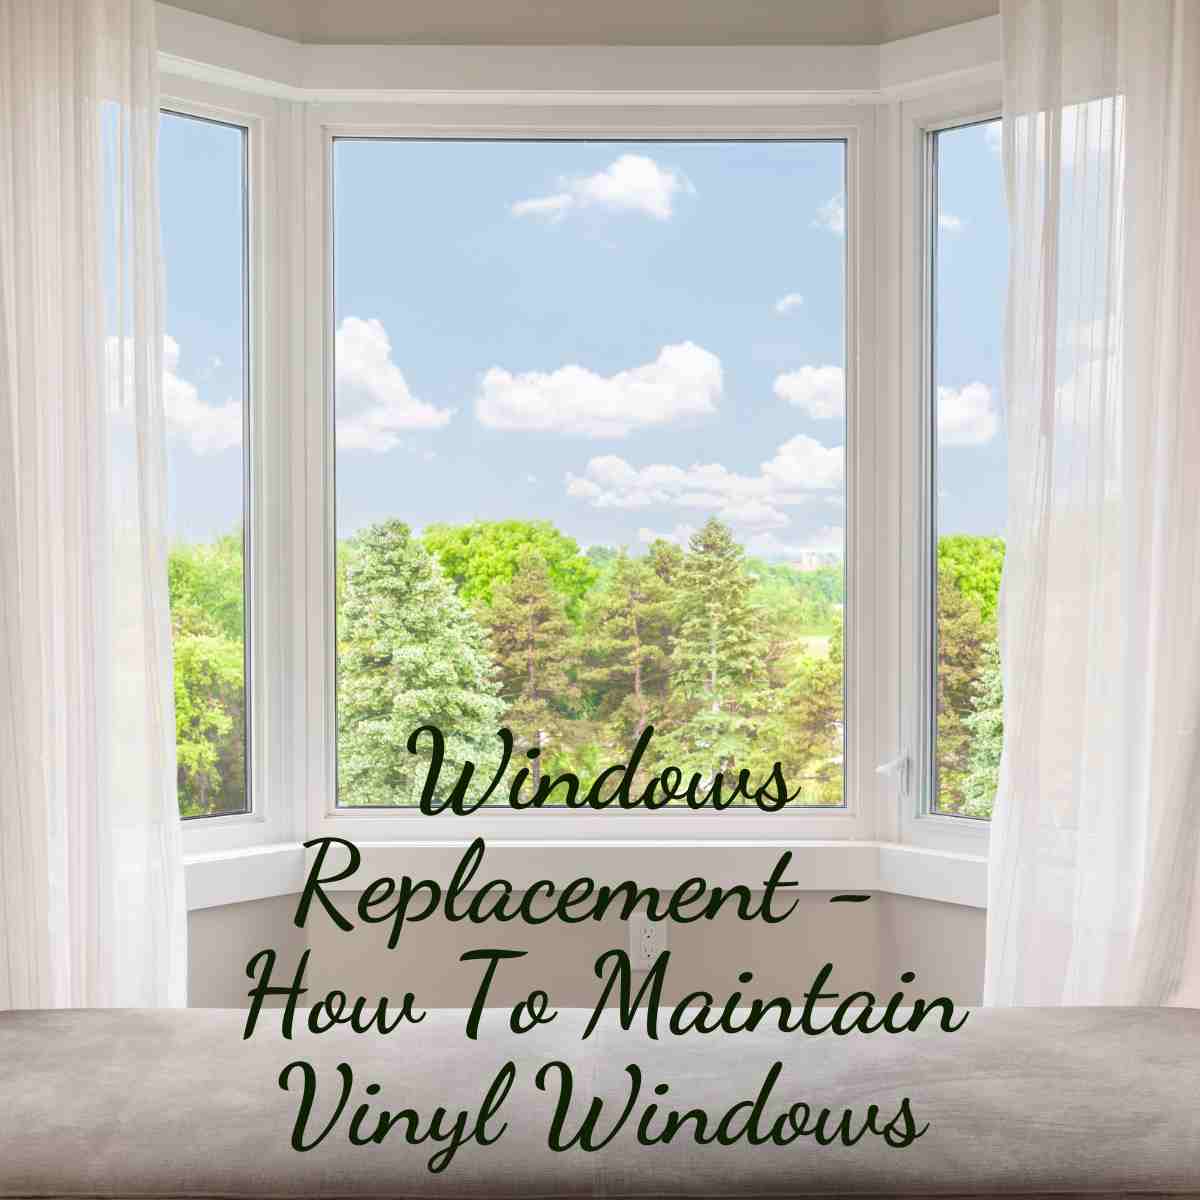 Windows Replacement - How To Maintain Vinyl Windows